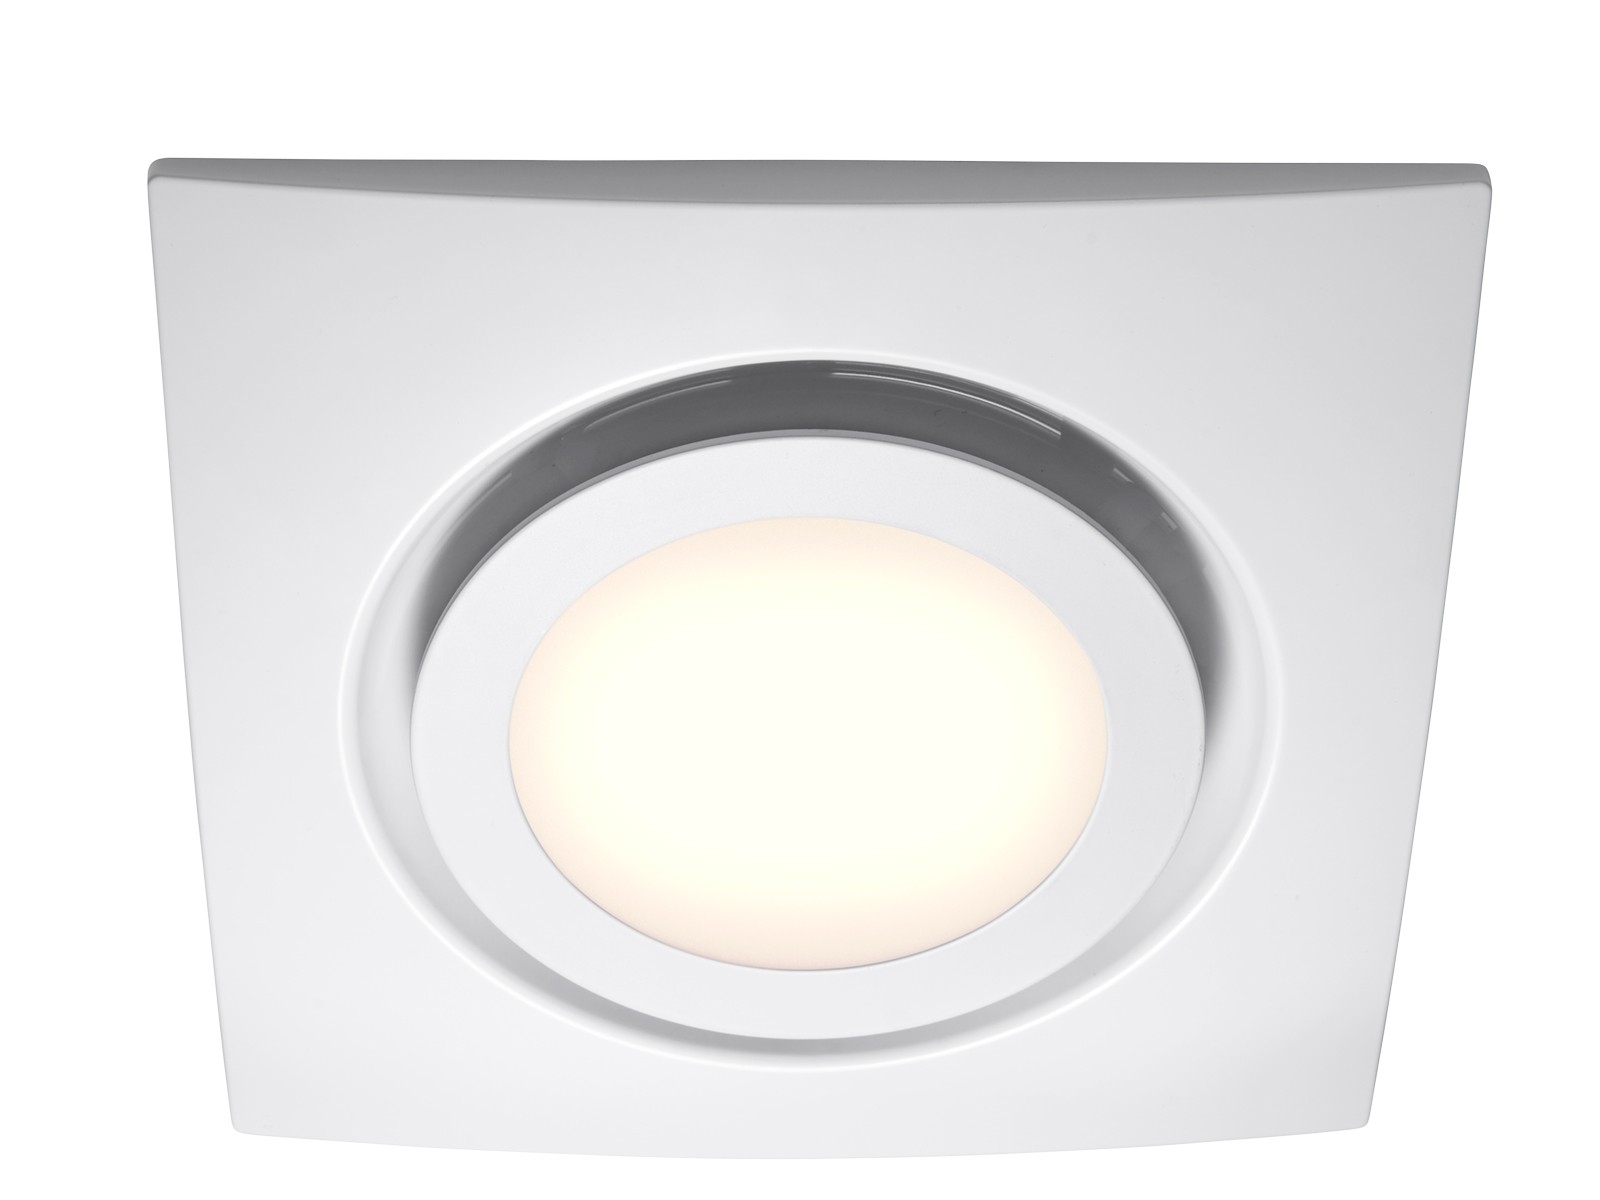 Bathroom Ceiling Extractor Fan With Led Lightexhaust fan with led light